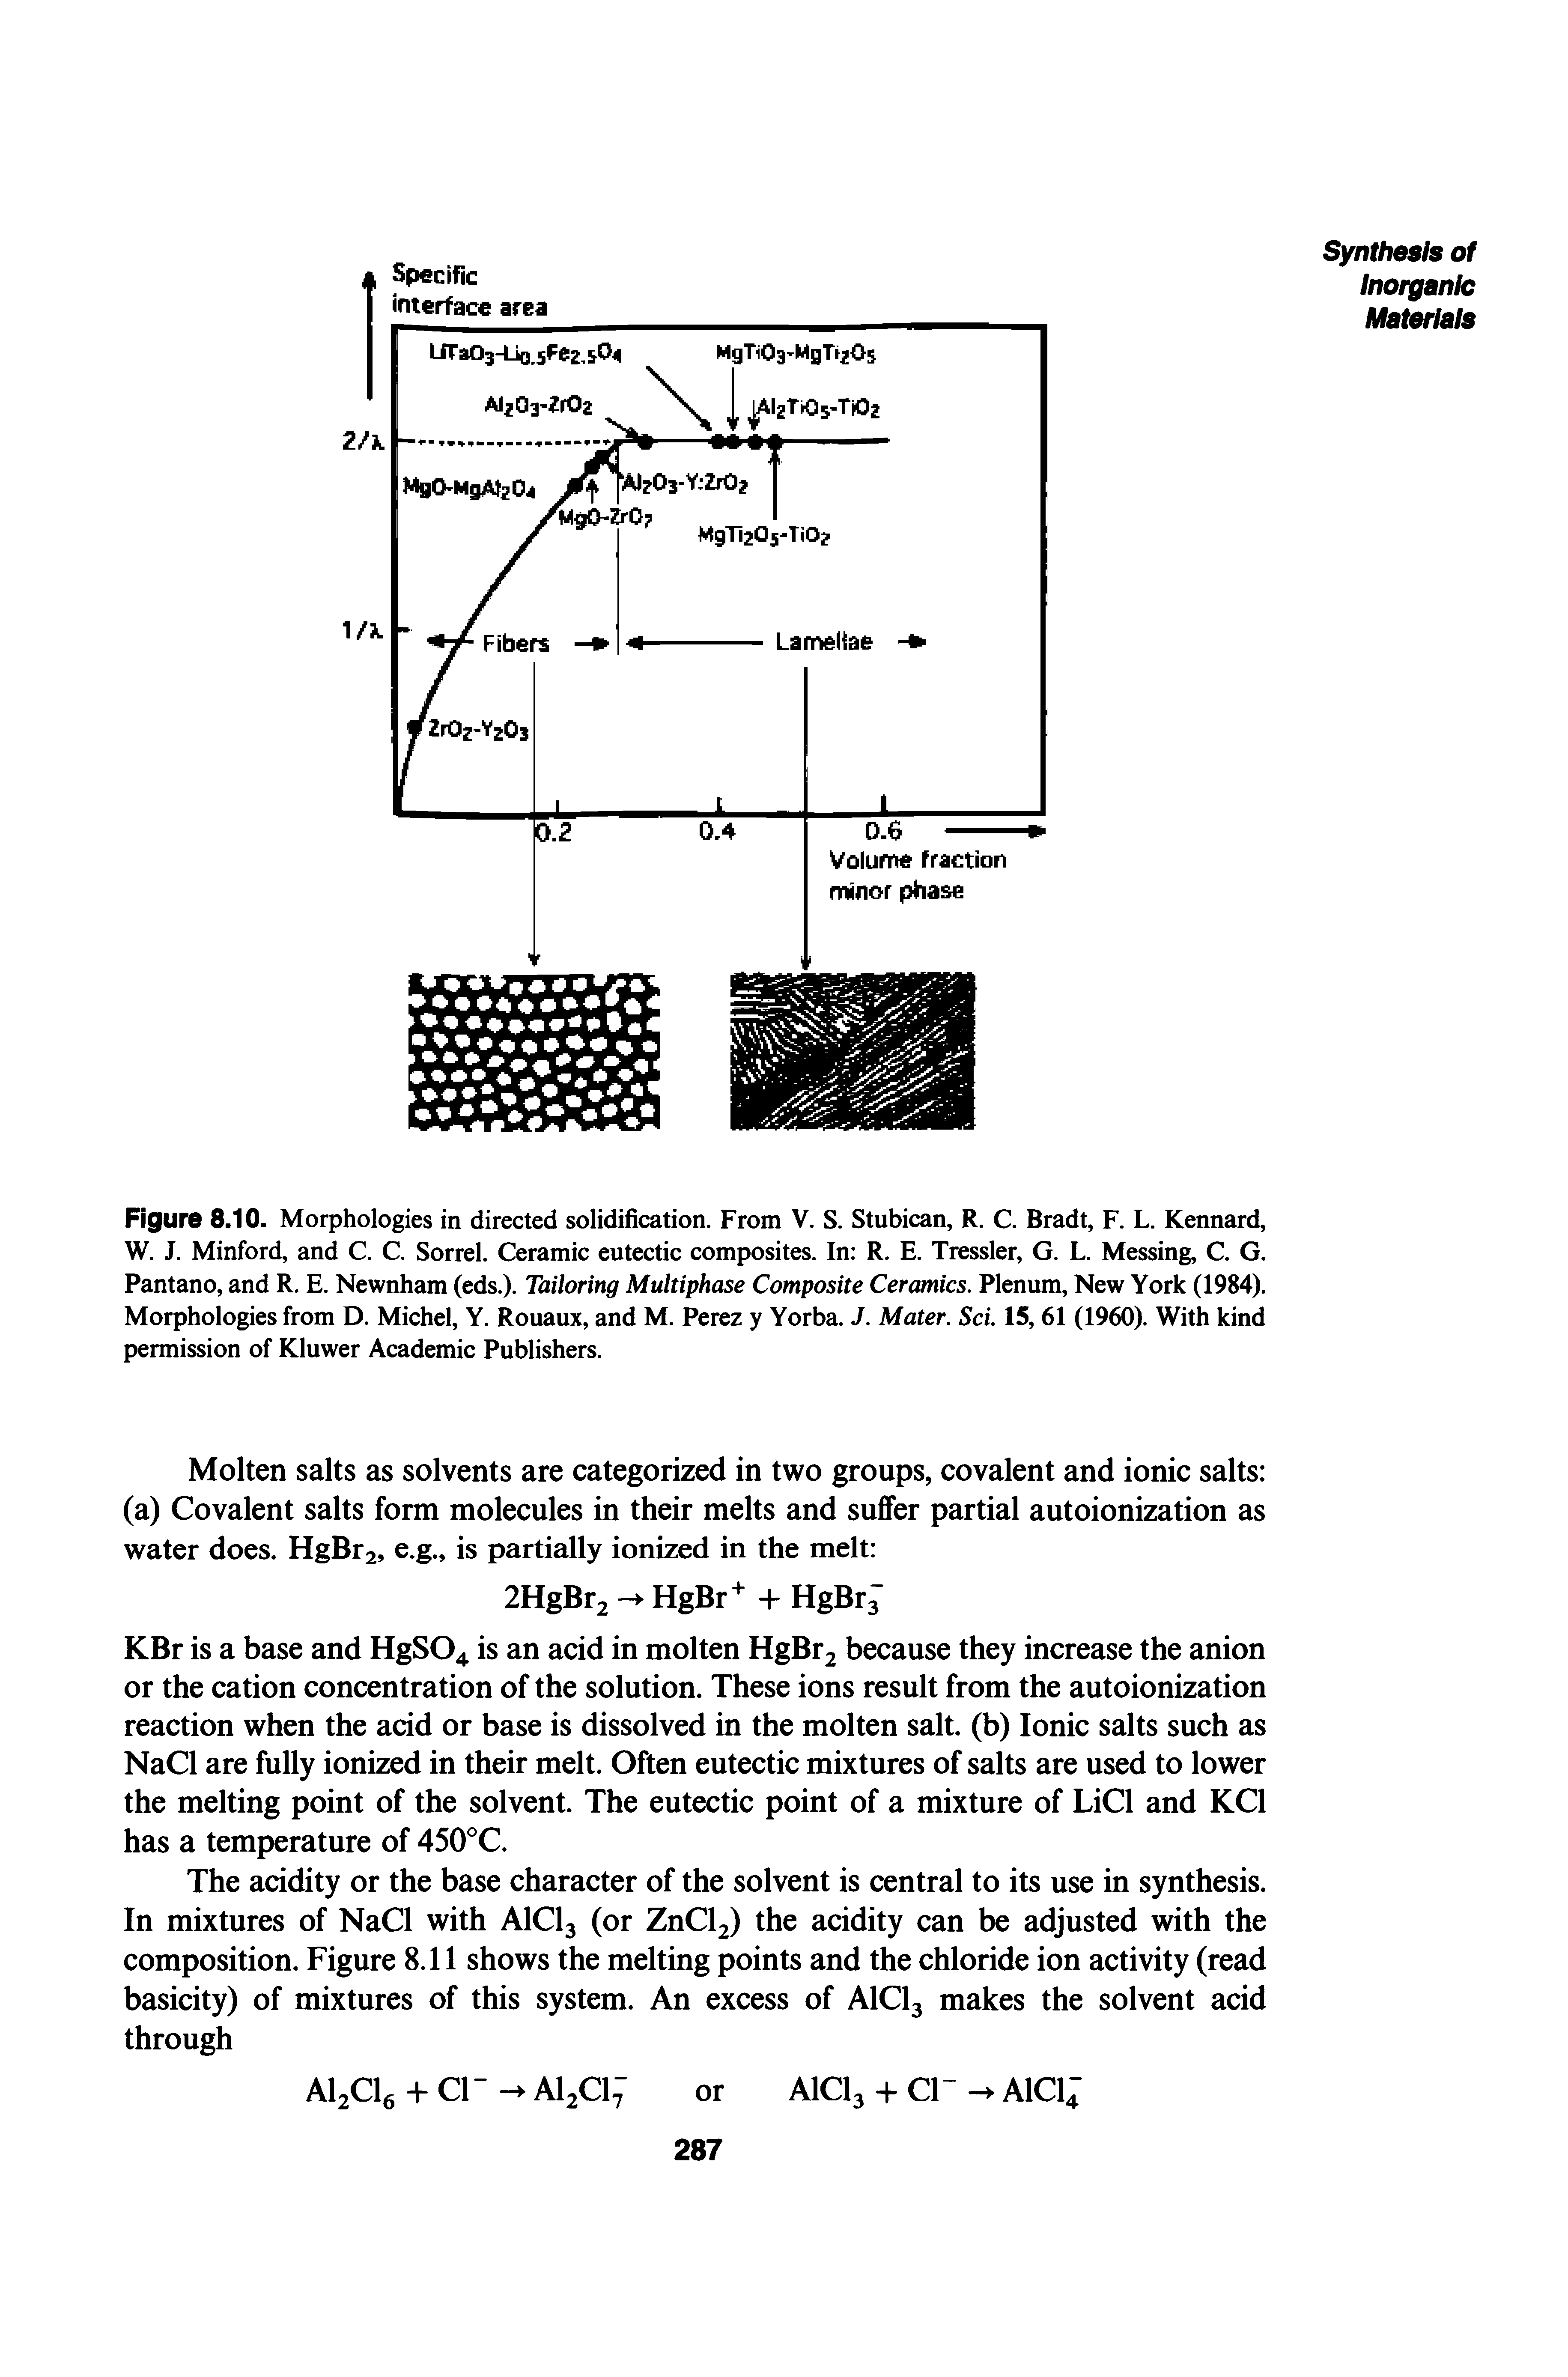 Figure 8.10. Morphologies in directed solidification. From V. S. Stubican, R. C. Bradt, F. L. Kennard, W. J. Minford, and C. C. Sorrel. Ceramic eutectic composites. In R. E. Tressler, G. L. Messing, C. G. Pantano, and R. E. Newnham (eds.). Tailoring Multiphase Composite Ceramics. Plenum, New York (1984). Morphologies from D. Michel, Y. Rouaux, and M. Perez y Yorba. J. Mater. Sci. 15,61 (1960). With kind permission of Kluwer Academic Publishers.